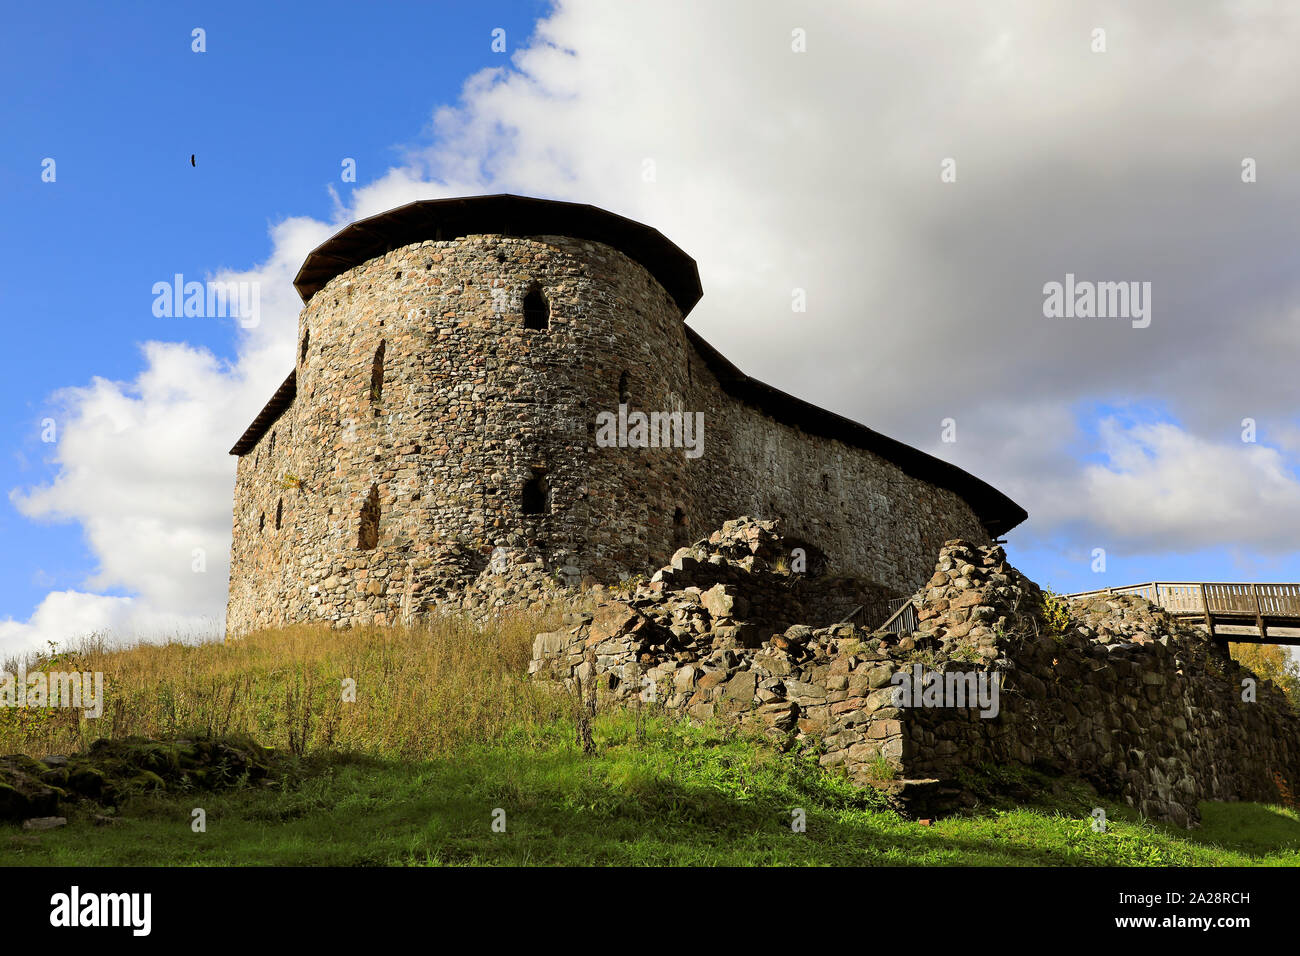 Medieval Raseborg Castle Ruins on a rock. Raseborg Castle was built in 1370s on a rock that was surrounded by water at the time. Against  the sky is s Stock Photo